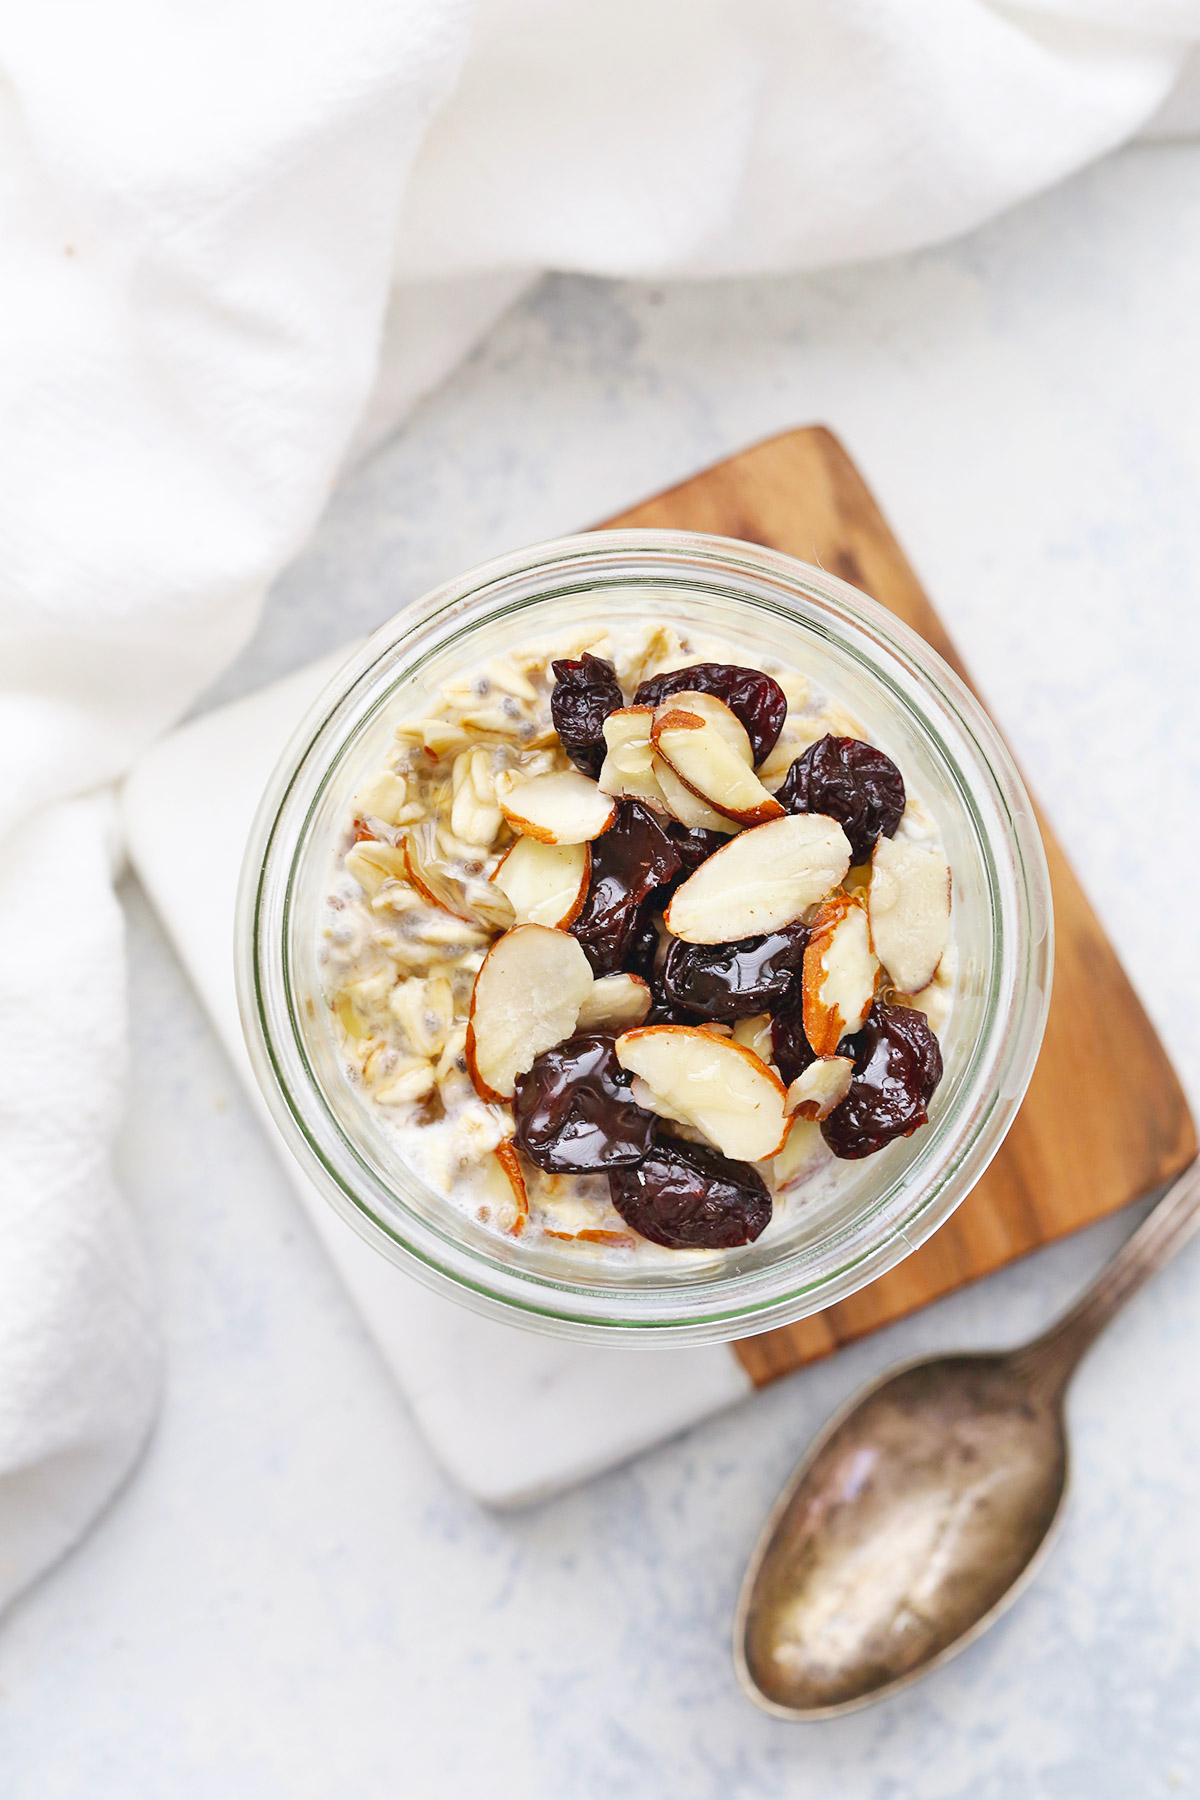 Cherry Almond Overnight Oats from One Lovely Life